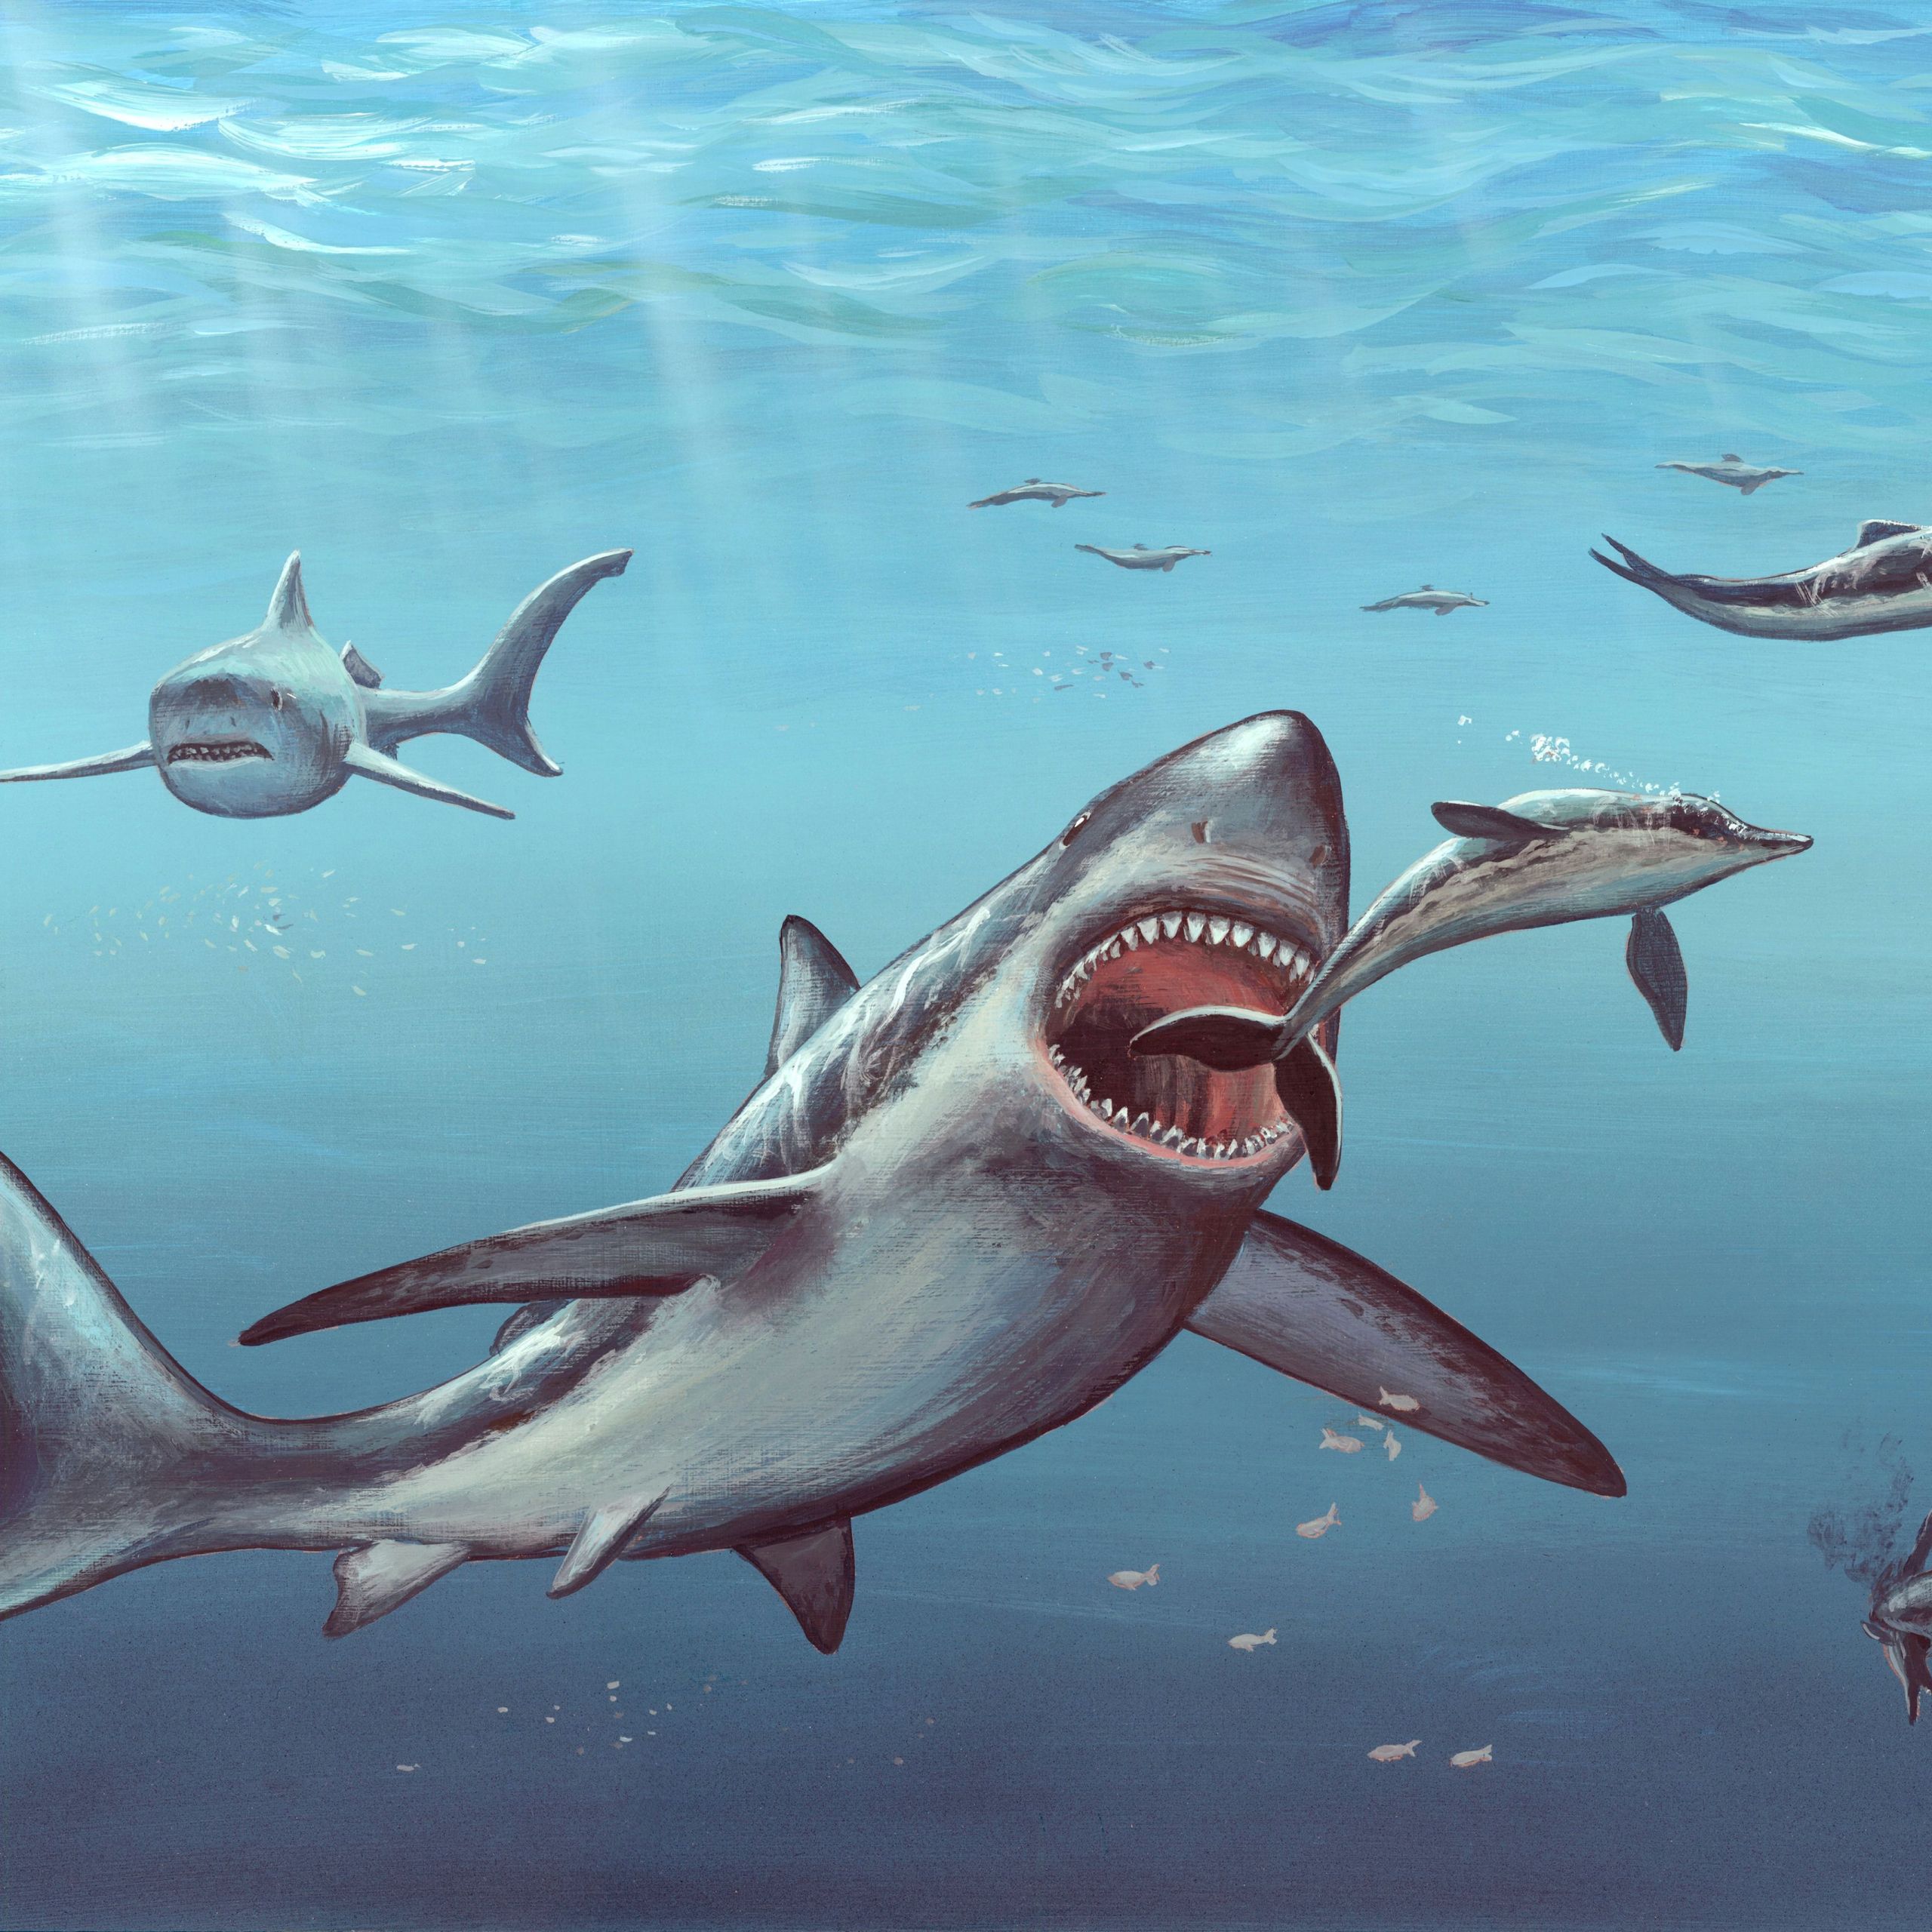 How to Draw A Megalodon Easy 11 Facts About Megalodon the Giant Prehistoric Shark